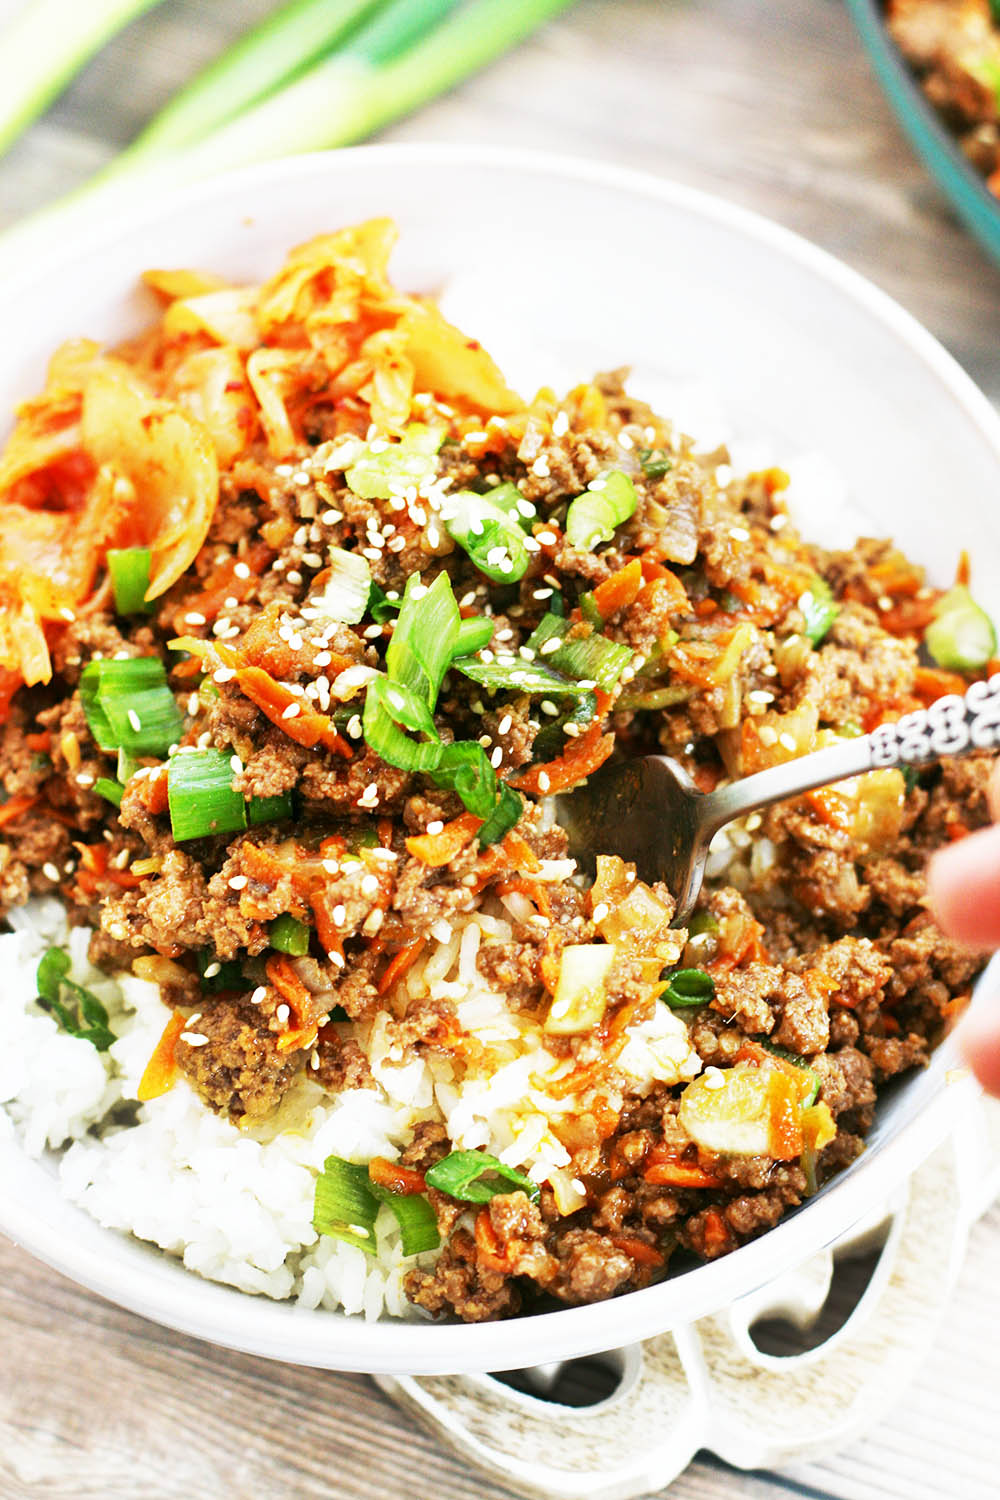 Korean ground beef bowls: Paleo-friendly and just 20 minutes to make.